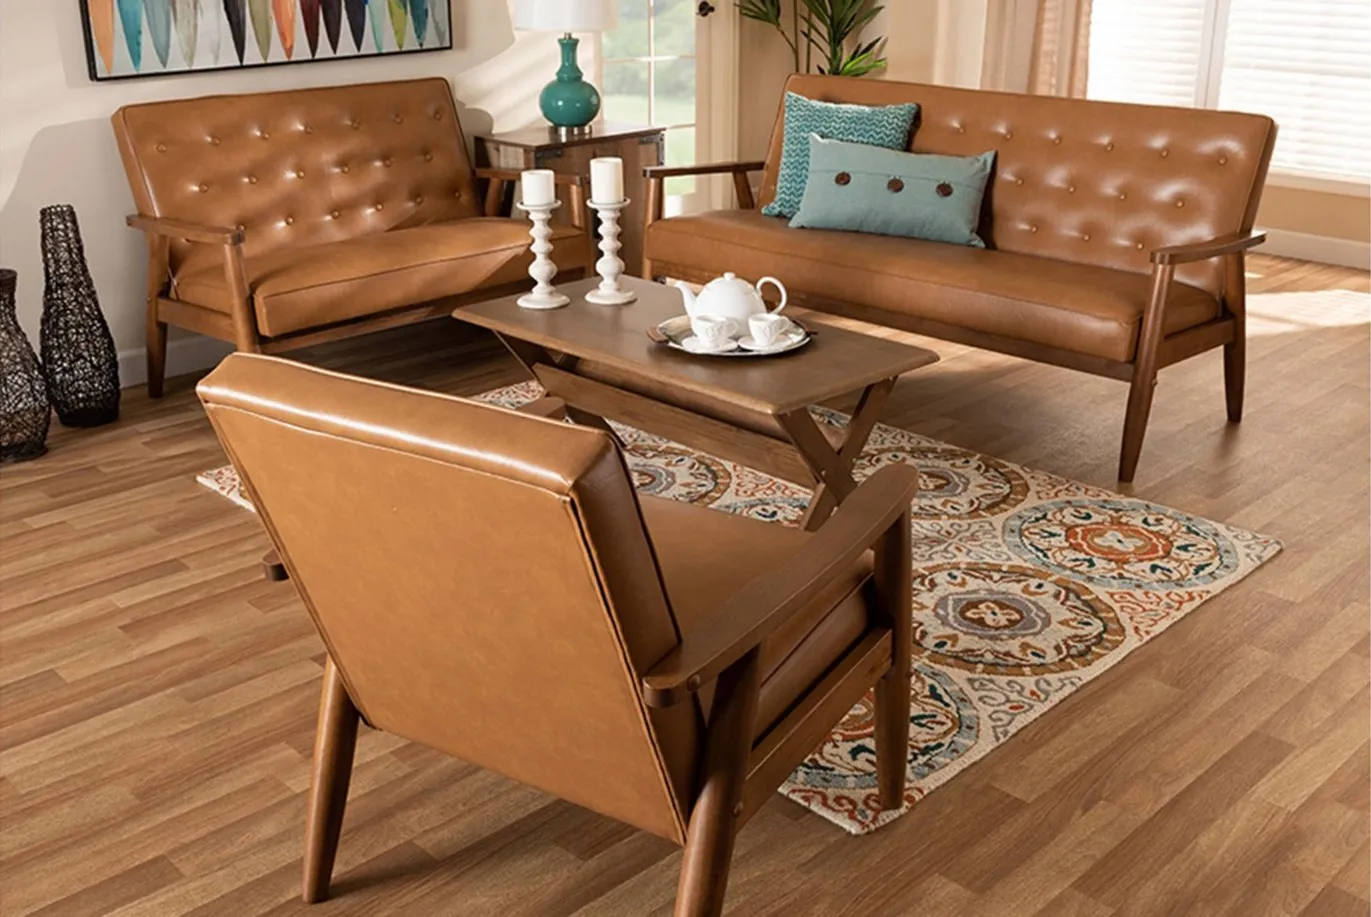 Sorrento 3-pc. Living Room Set in Tan/Walnut Brown by Wholesale Interiors